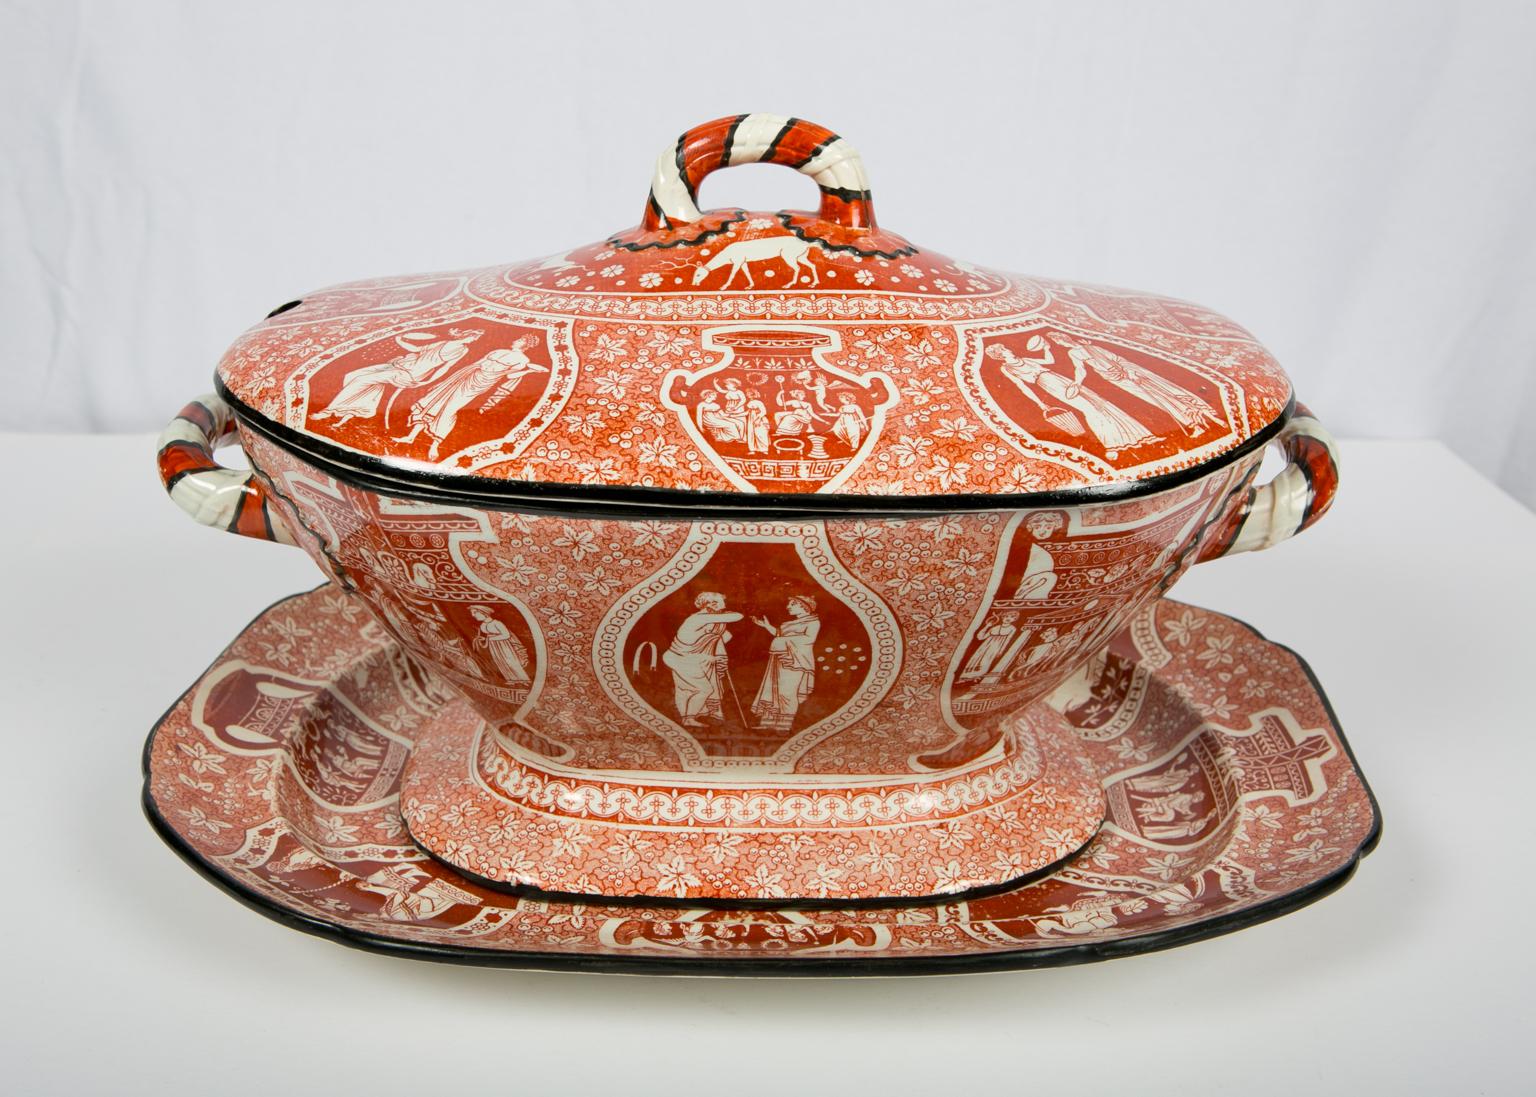 English Antique Red Greek Ware Soup Tureen Decorated with Classical Figures circa 1810